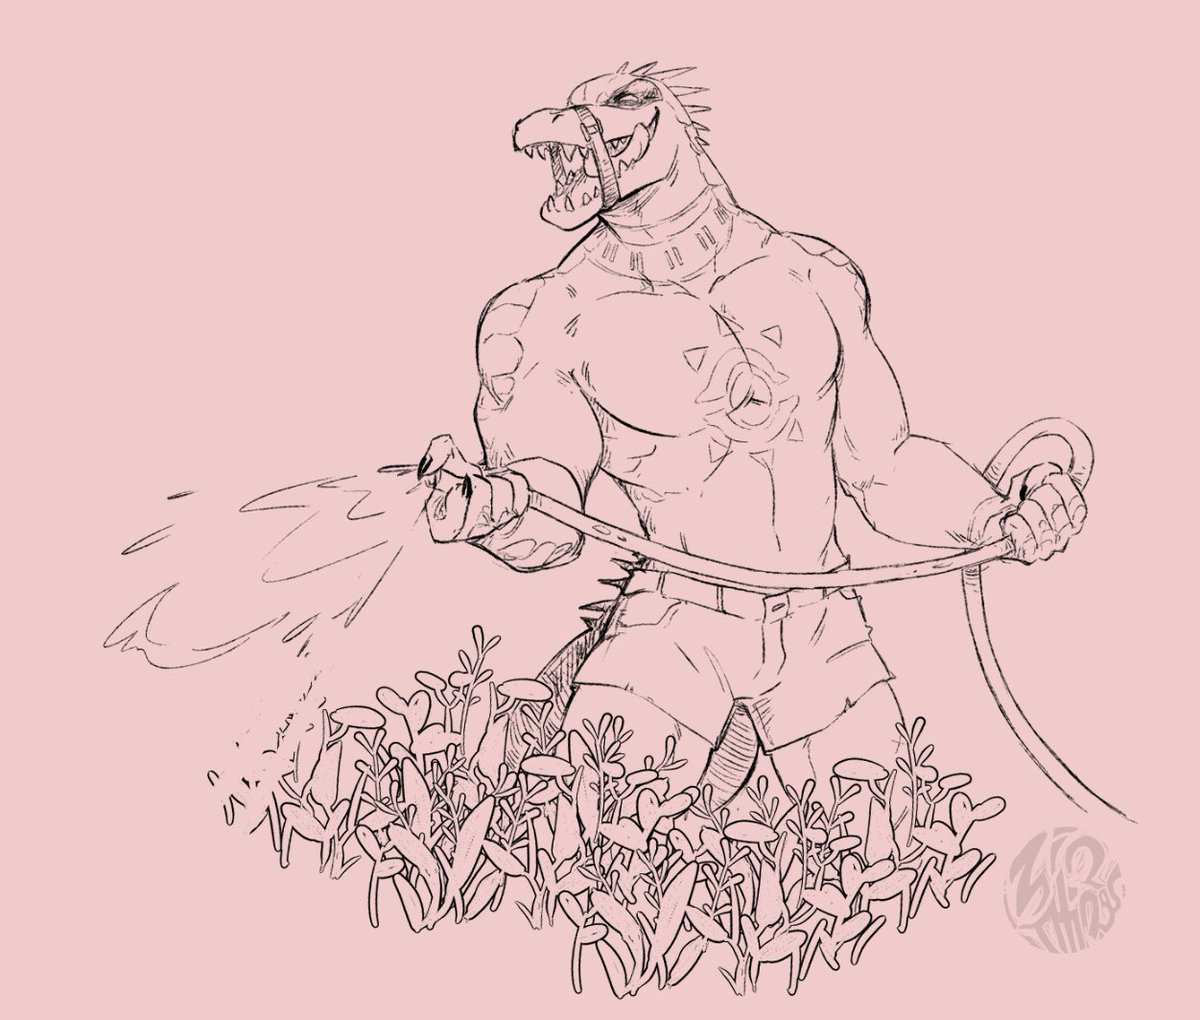 bold of you to taunt the gardener in his own territory!

ha ha get got

#dislytefanart